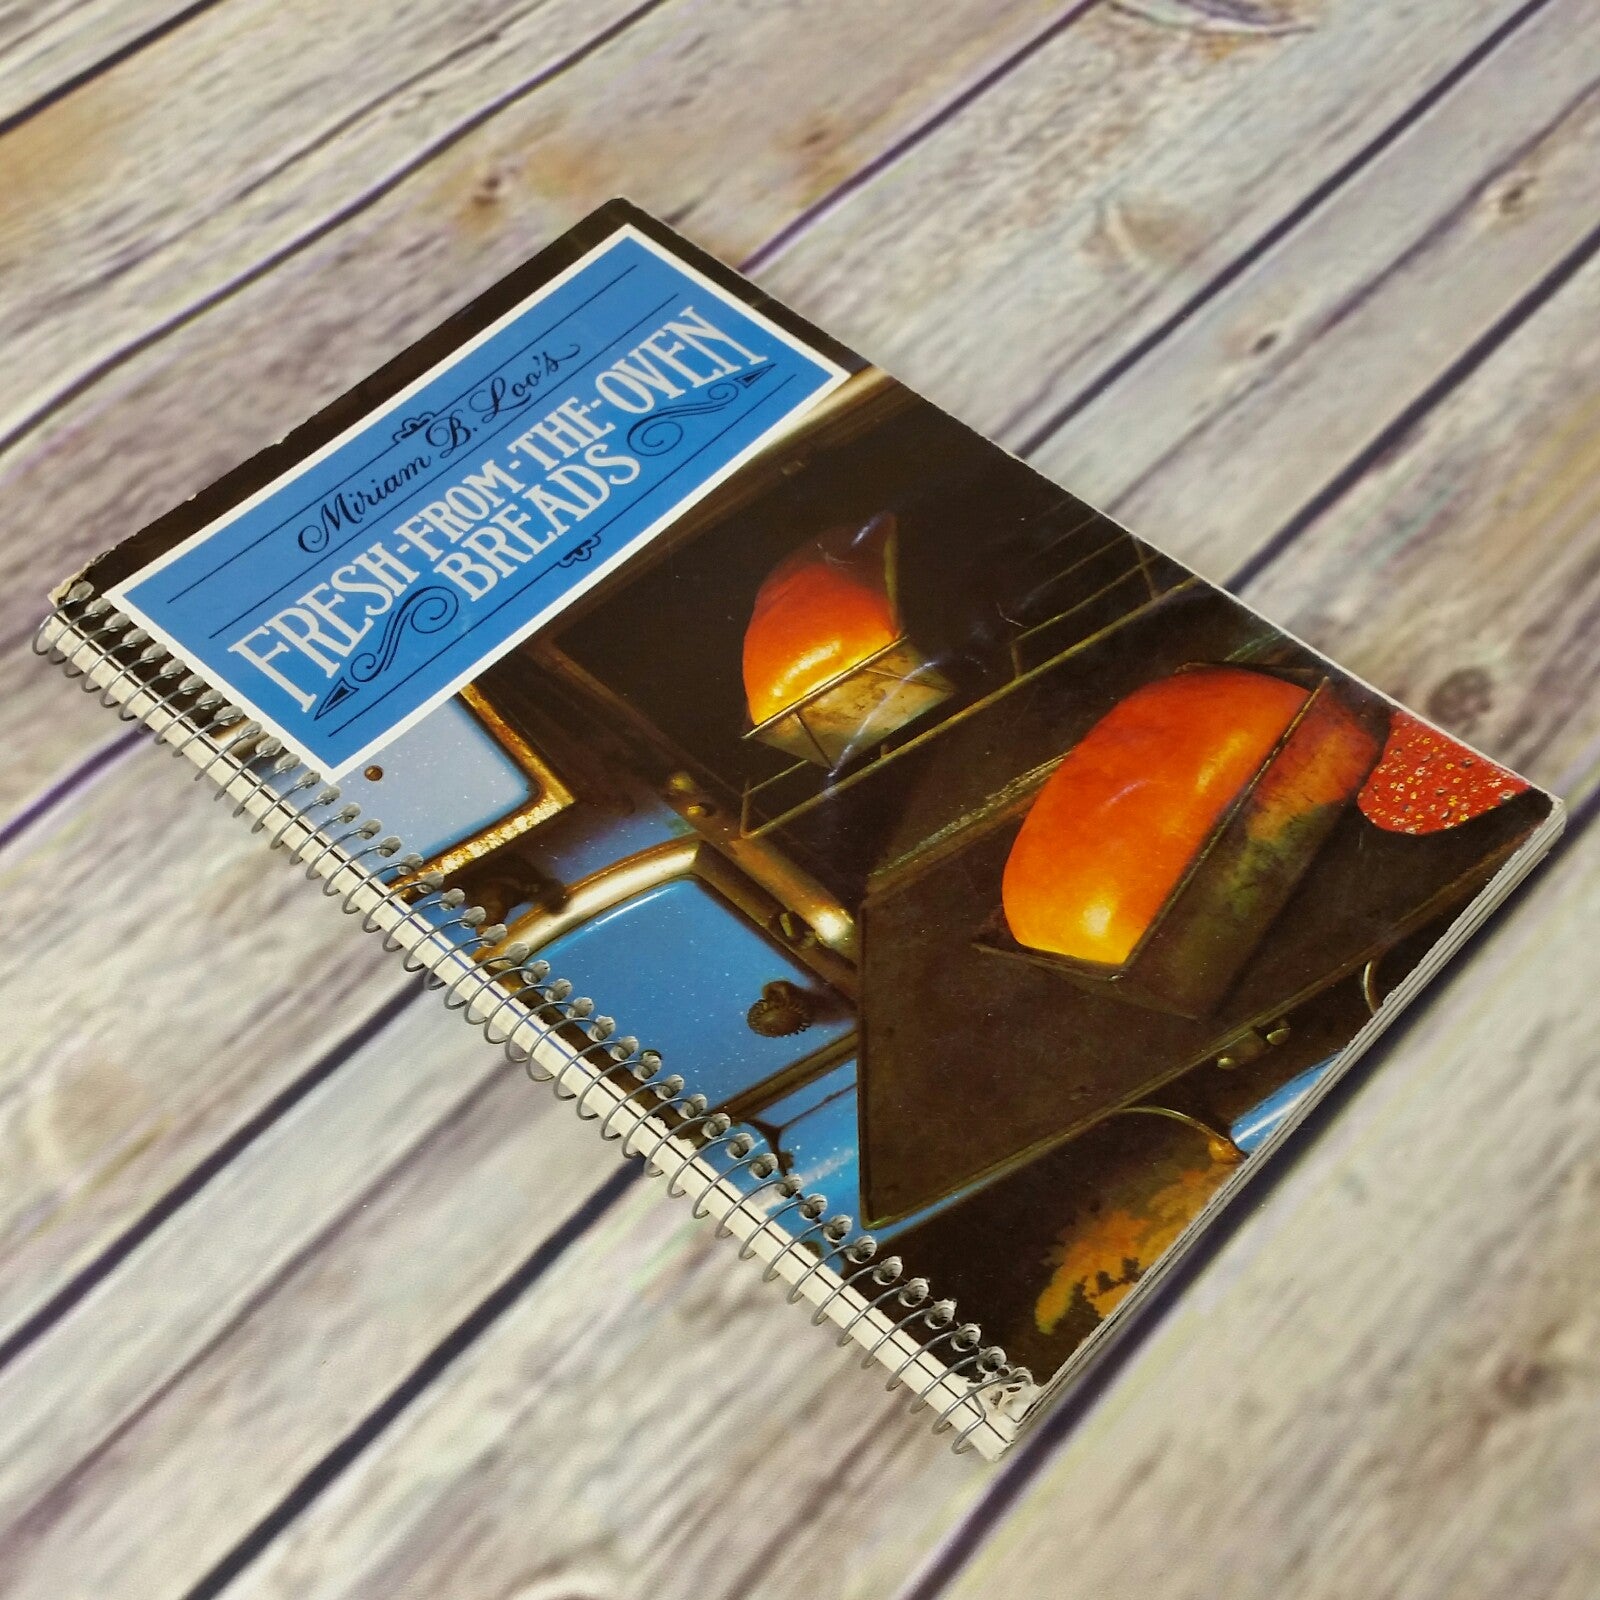 Vintage Bread Cookbook Fresh From the Oven Breads Recipes Miriam Loo 1982 - At Grandma's Table